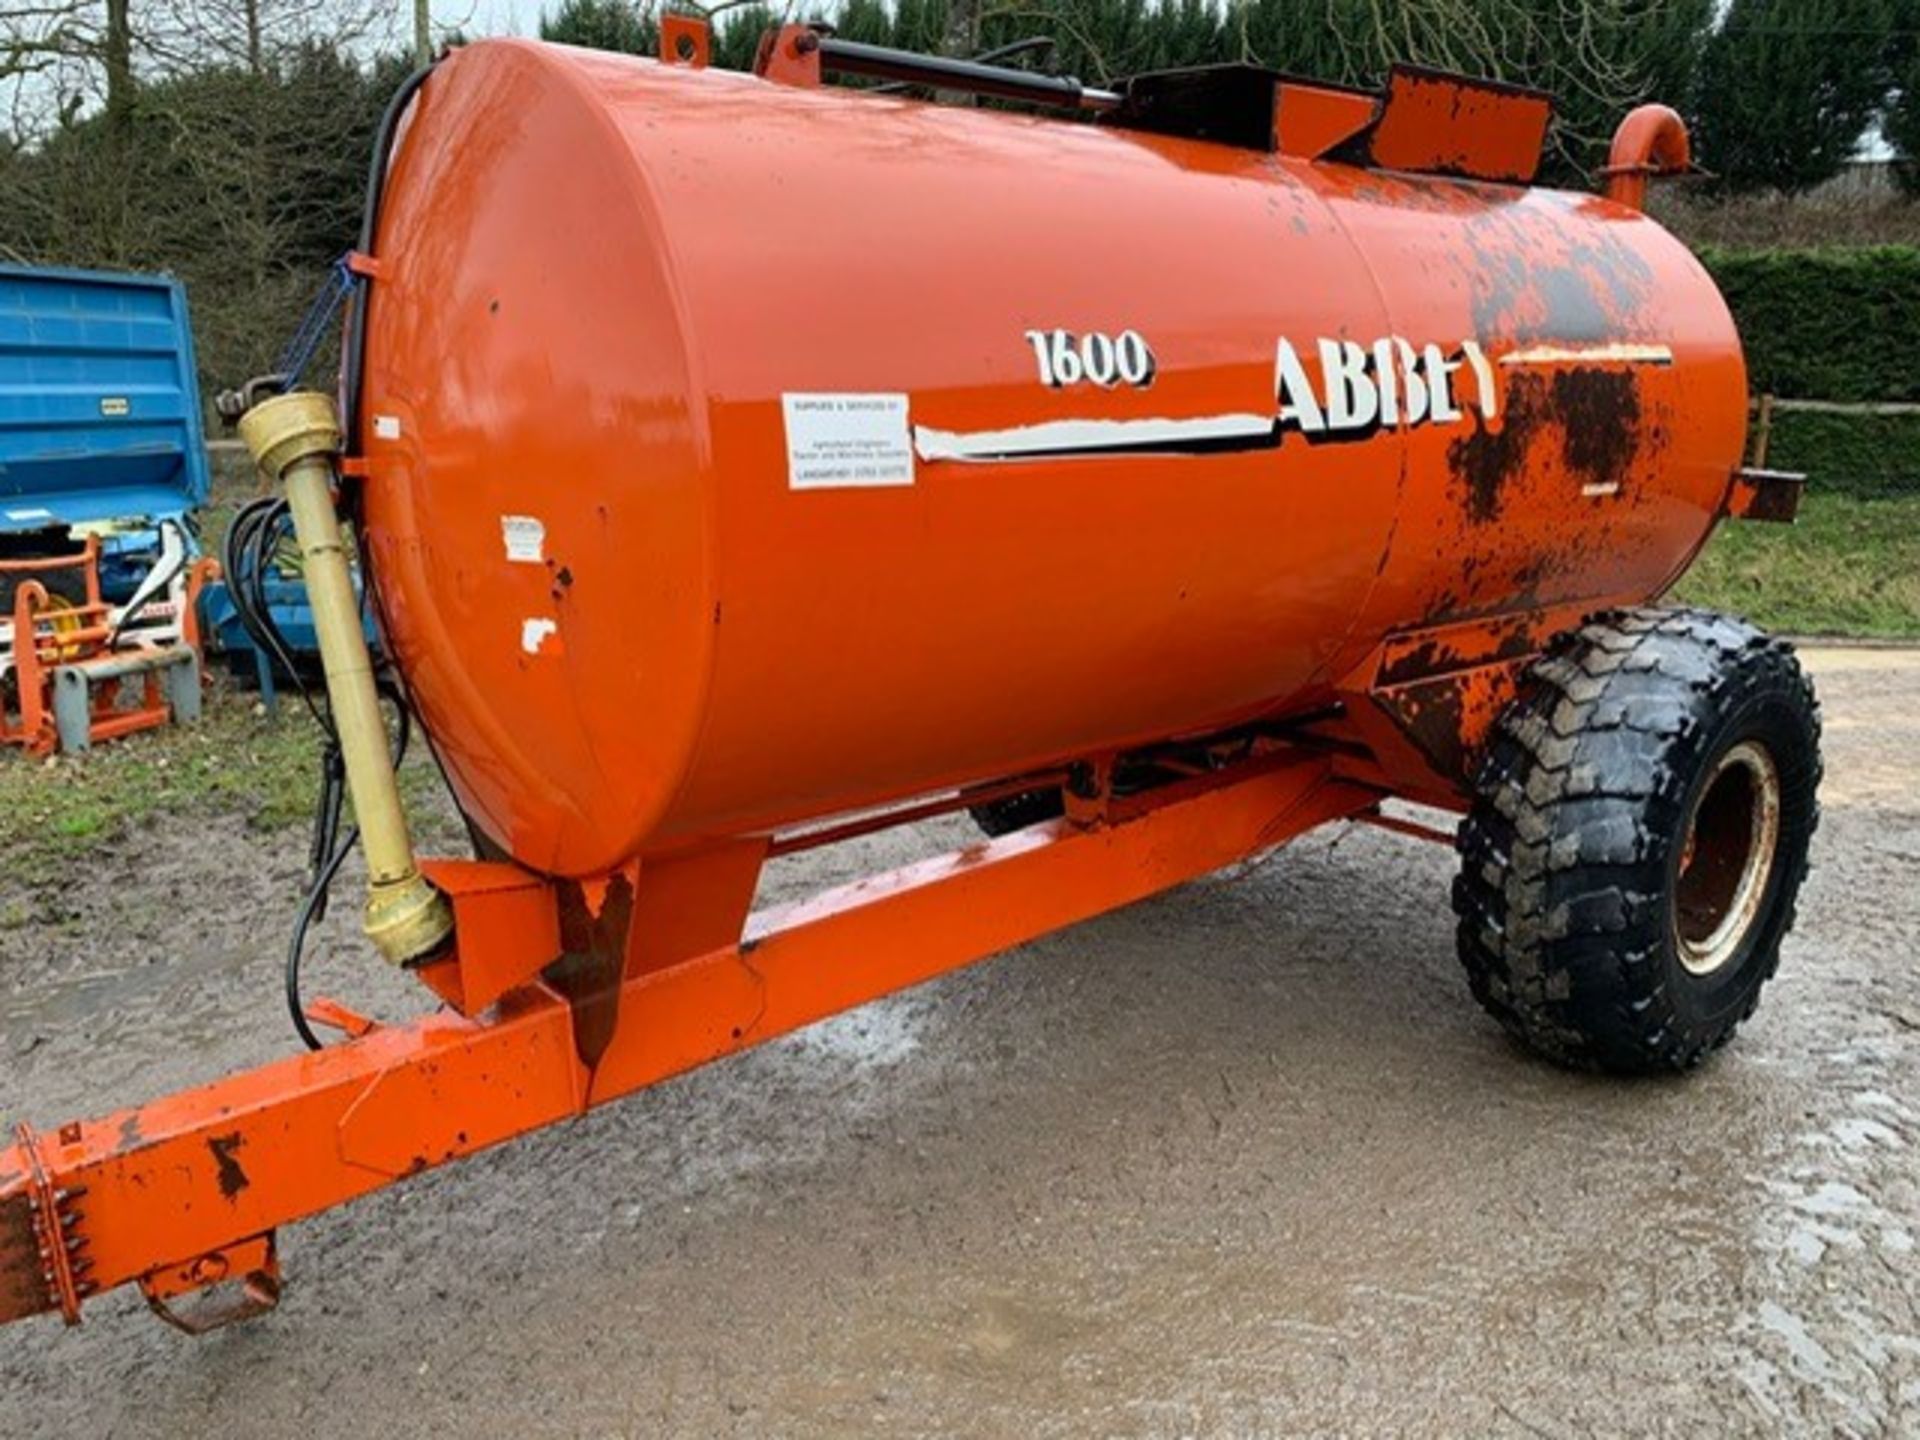 ABBEY 1600 GALLON TOP FILL TANKER - Image 7 of 8